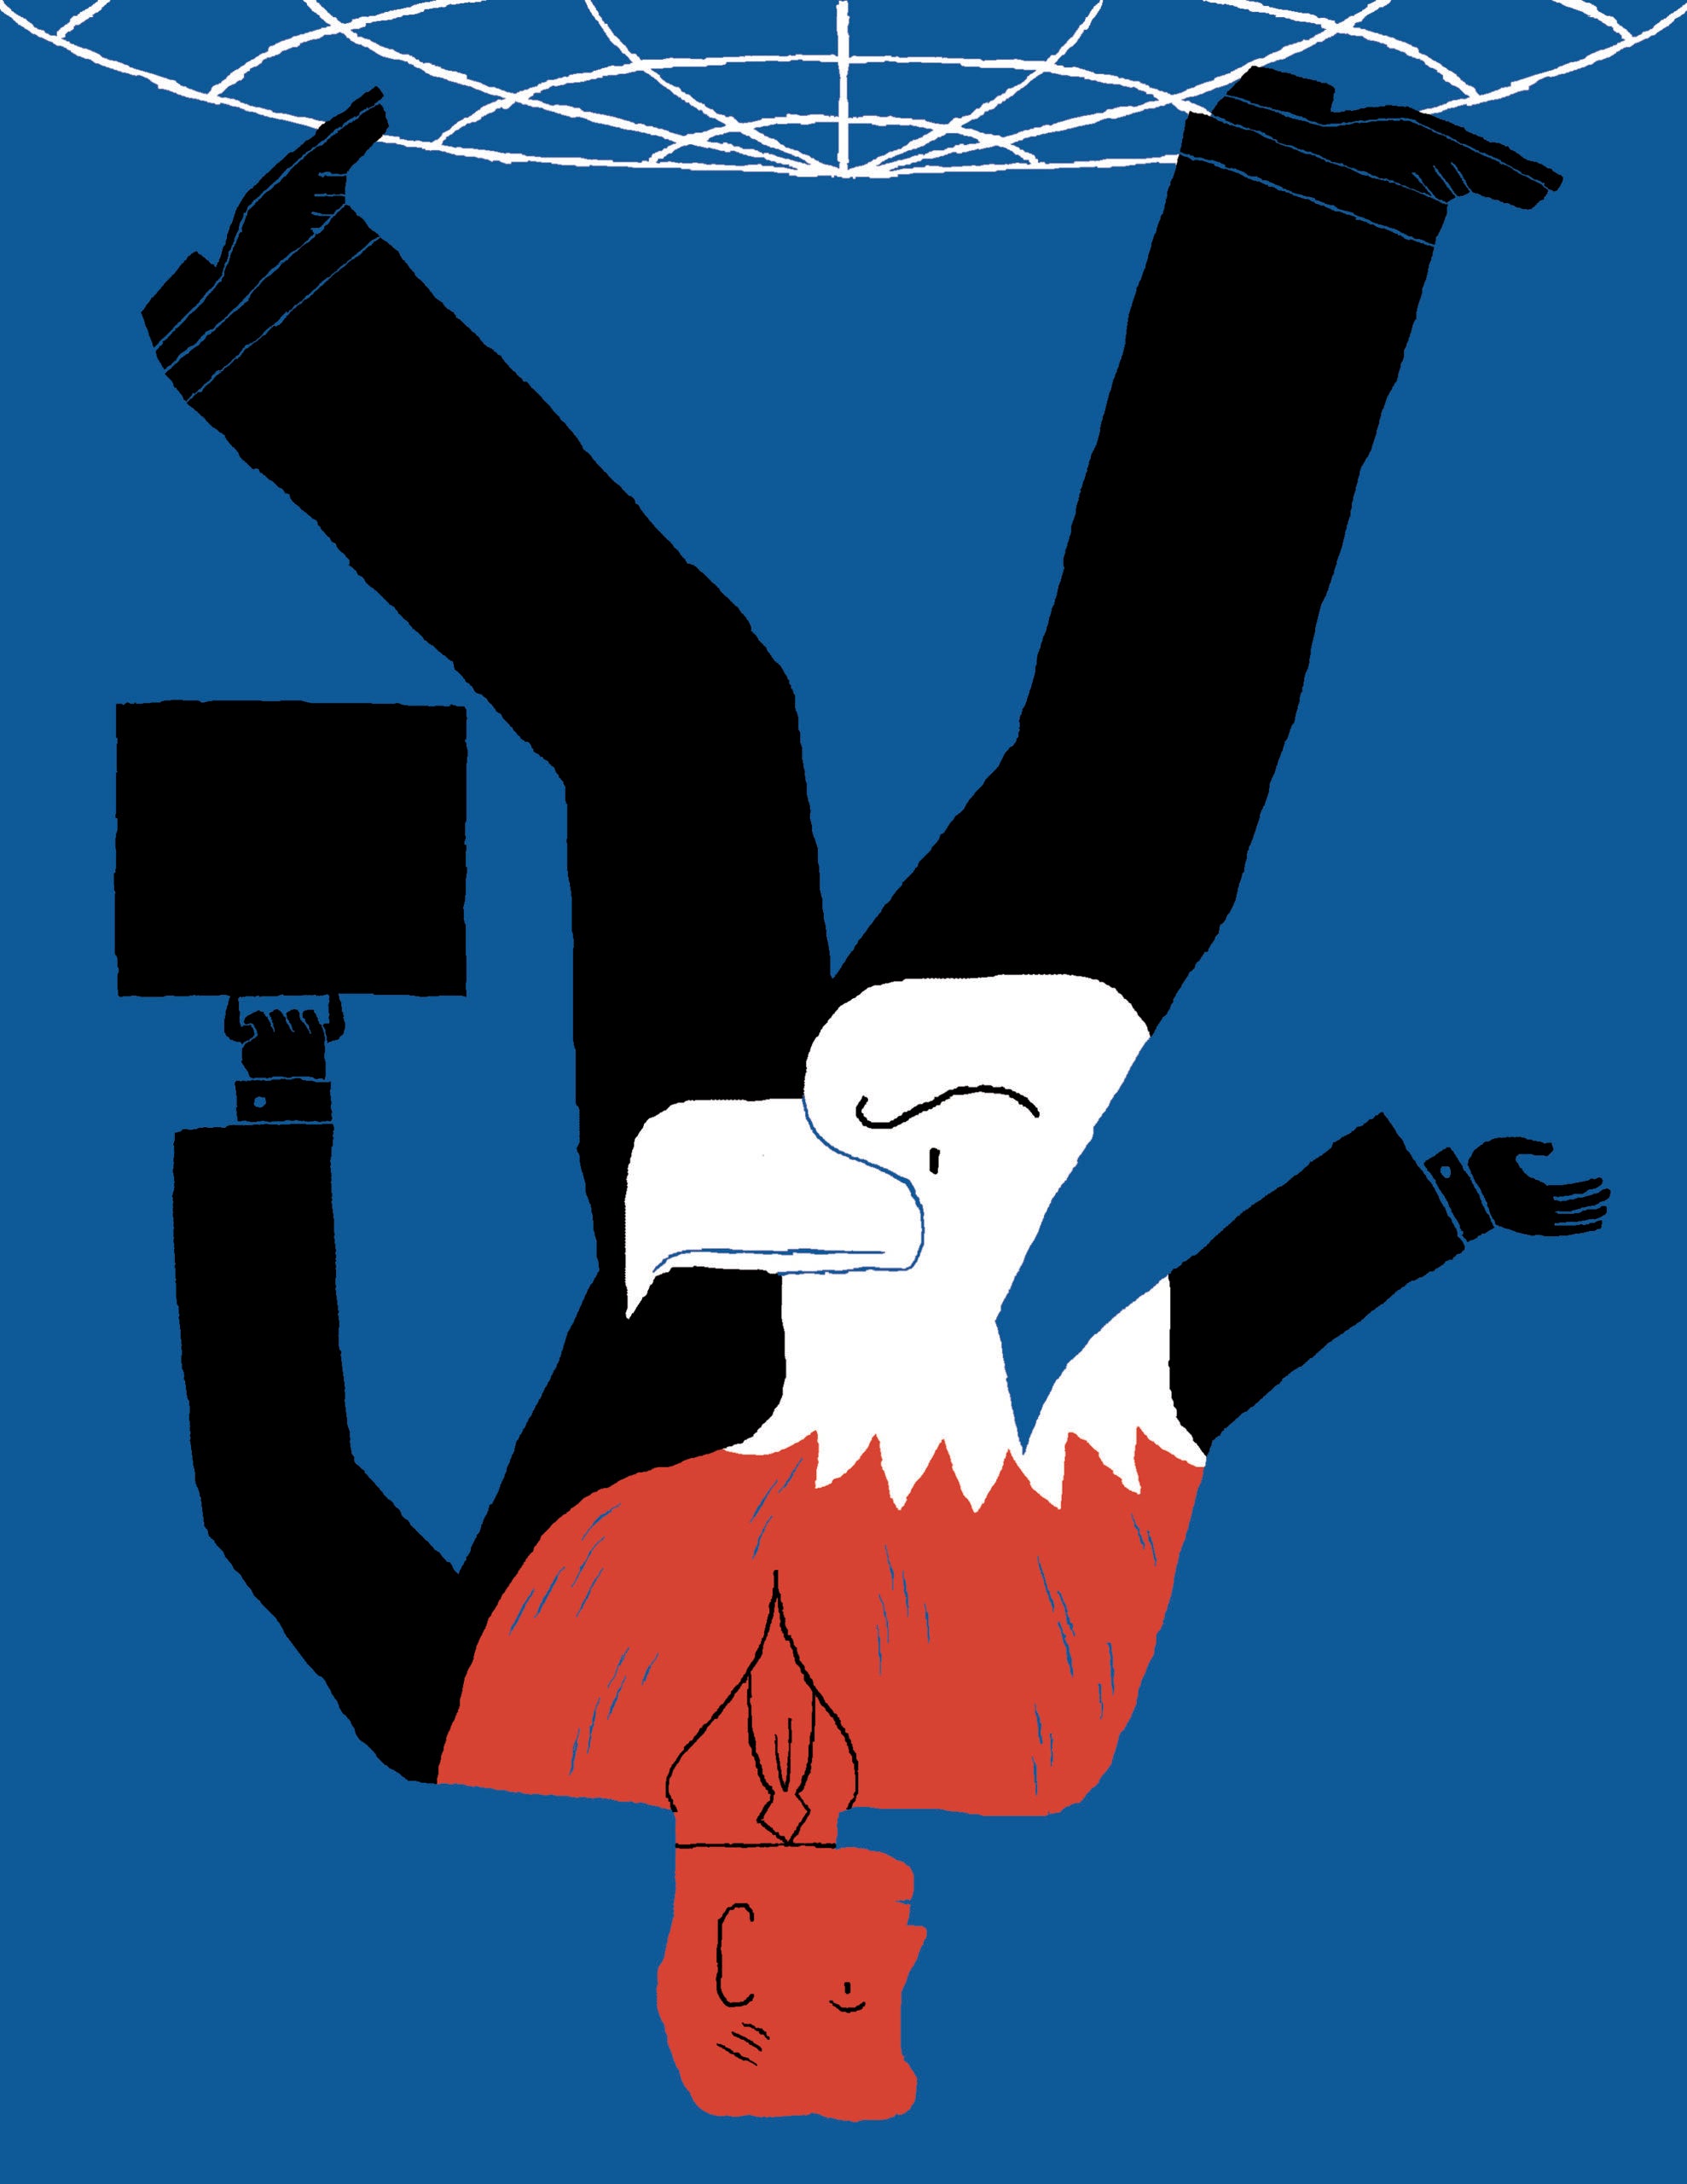 Illustration combining an eagle head and a person carrying a briefcase